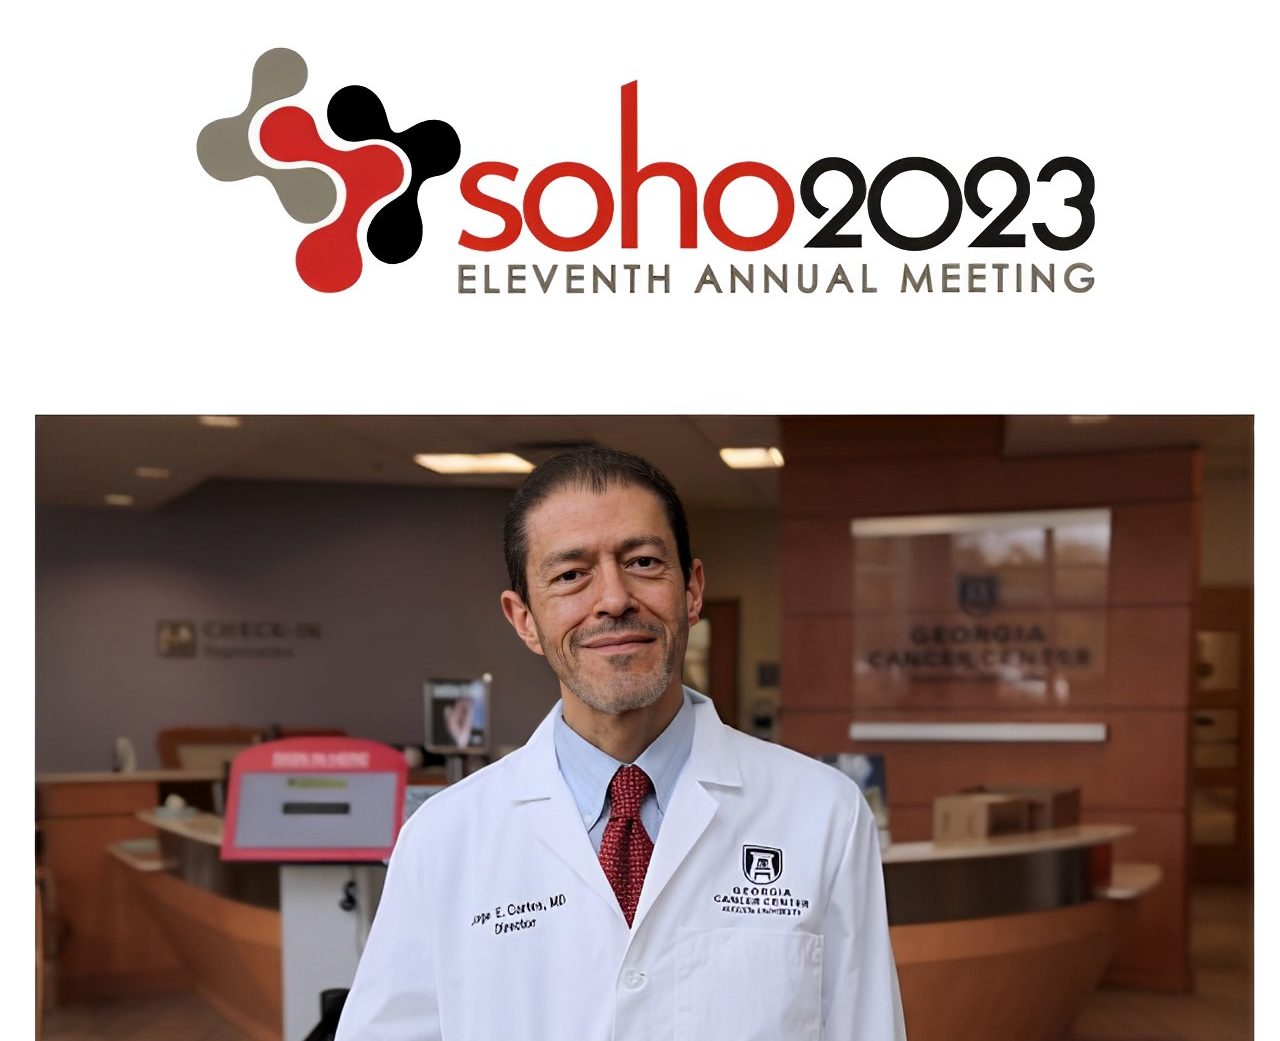 Jorge Cortes: It is an honor to receive this award named after a giant in leukemia research and a great mentor to me by another giant and mentor Hagop Kantarjian at the Society of Hematologic Oncology (SOHO).